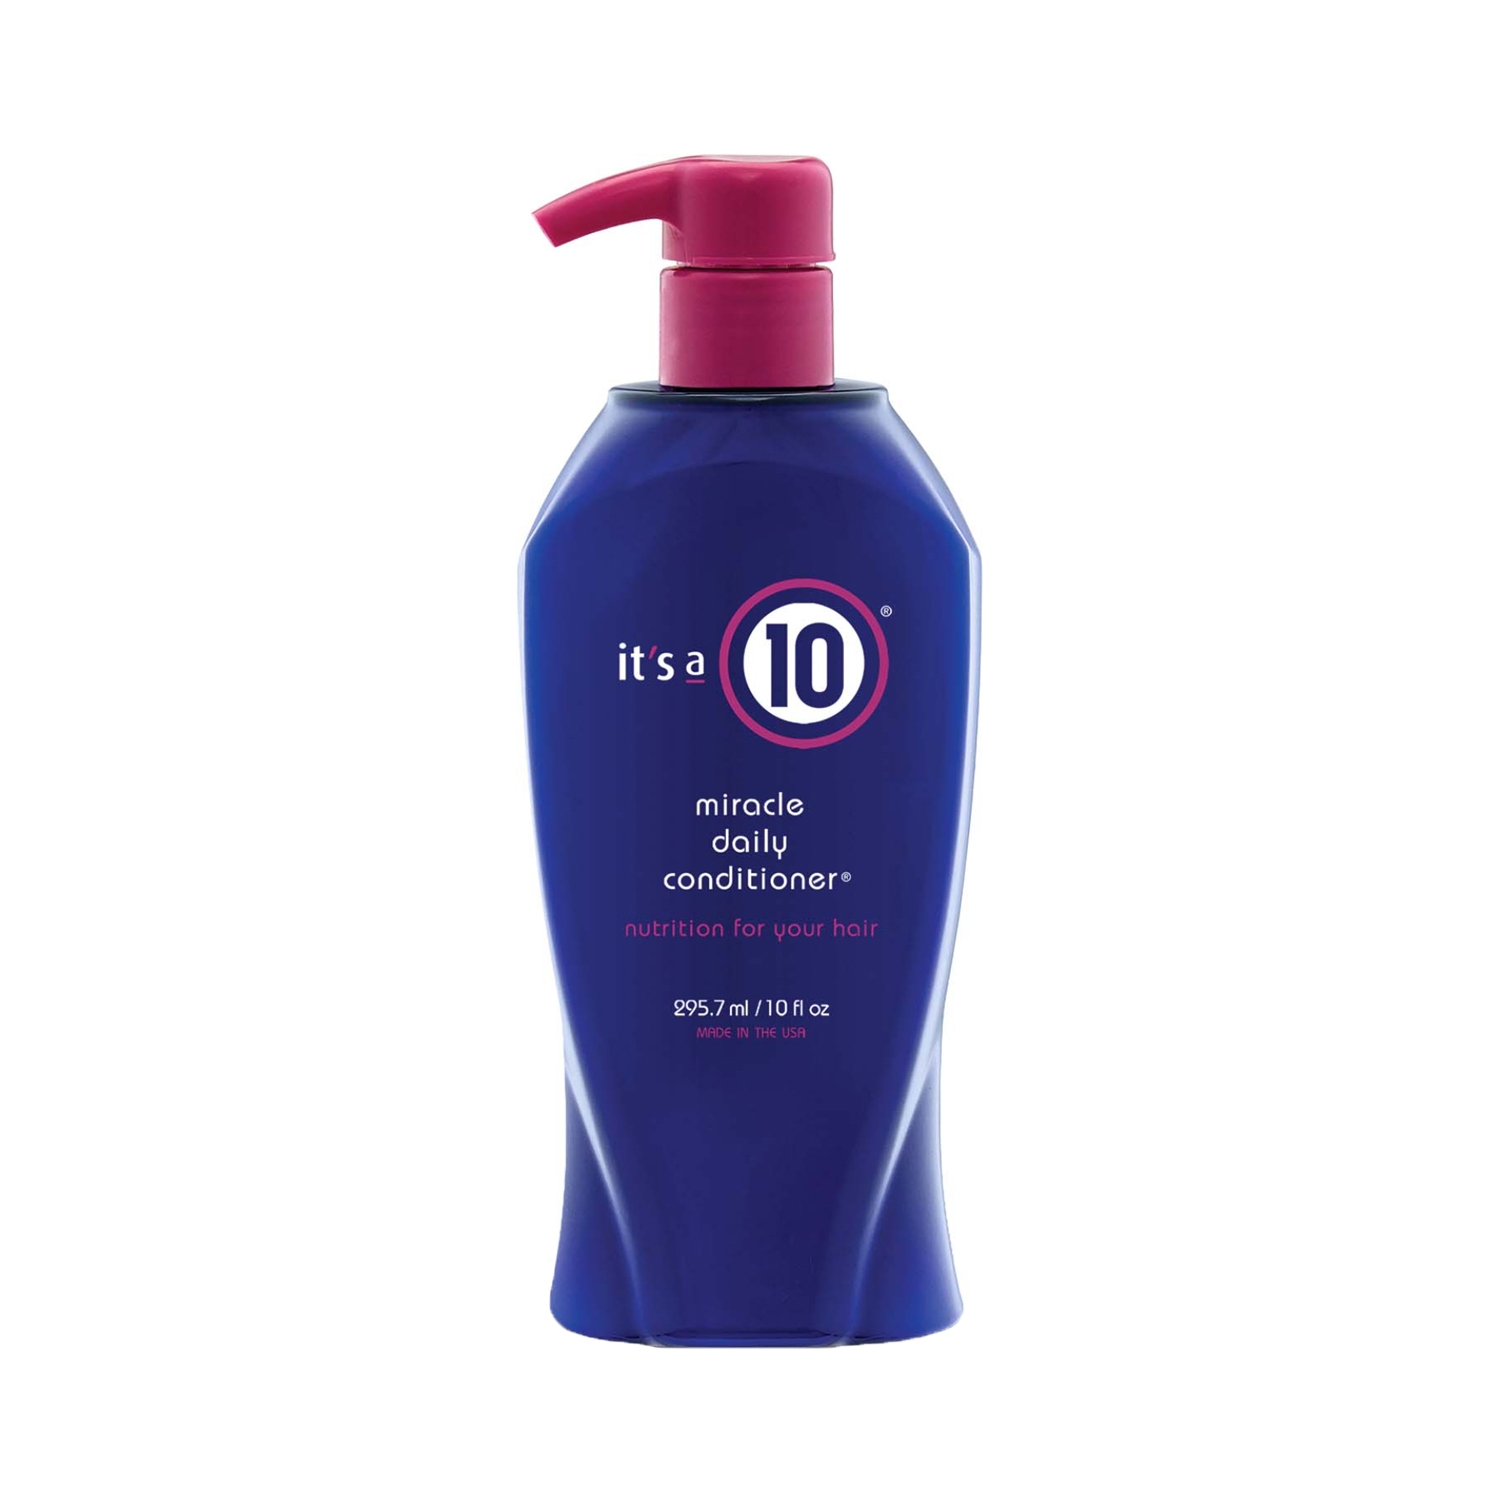 It's a 10 Haircare | It's a 10 Haircare Miracle Daily Conditioner (295.7ml)